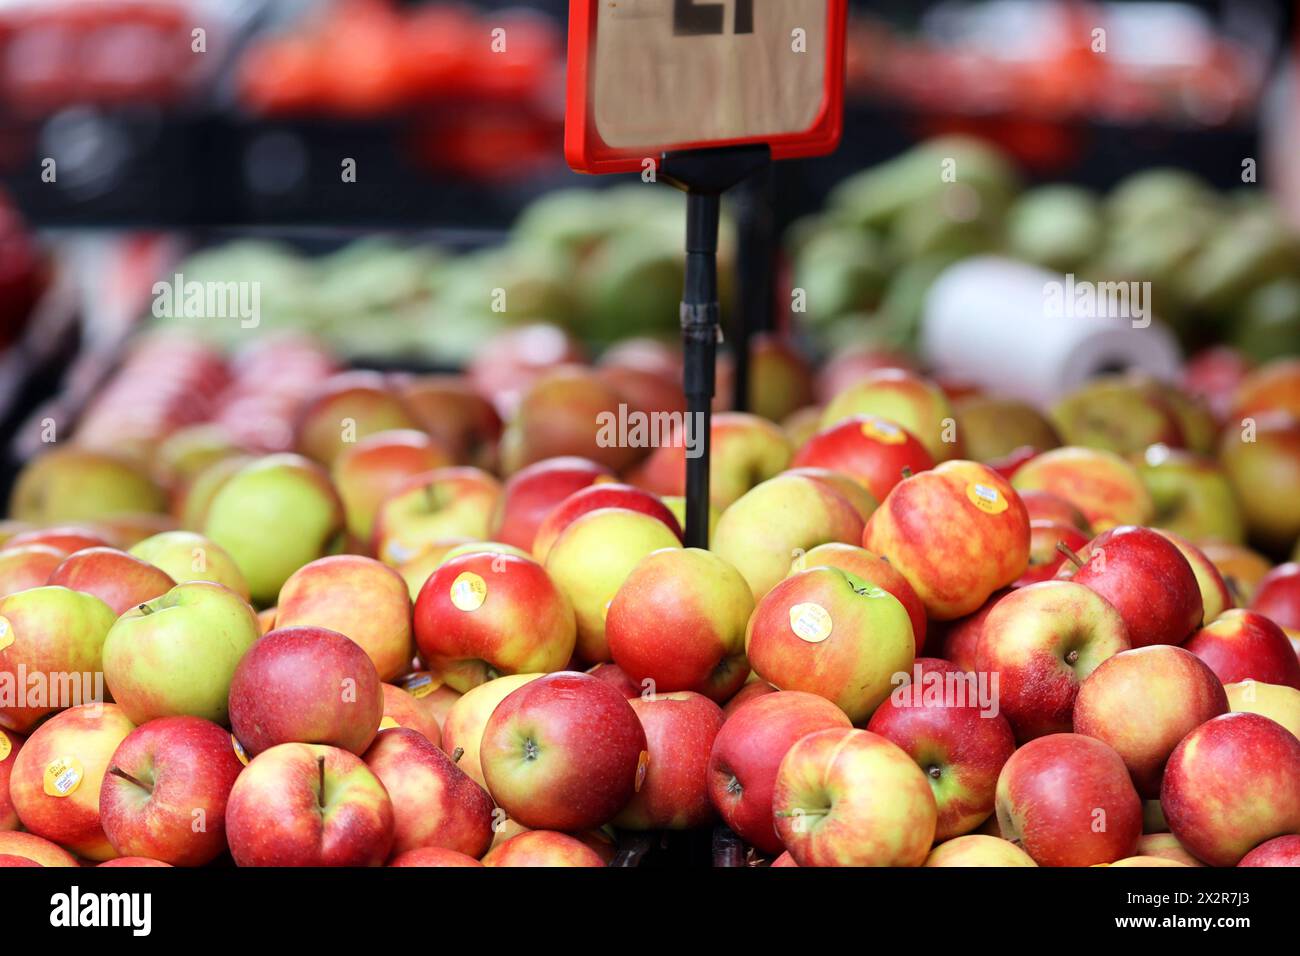 Obst ohne Verpackung Äpfel die lose angeboten werden, liegen an einem Obststand zum Verkauf bereit *** Fruit without packaging Apples that are offered loose are available for sale at a fruit stand Stock Photo